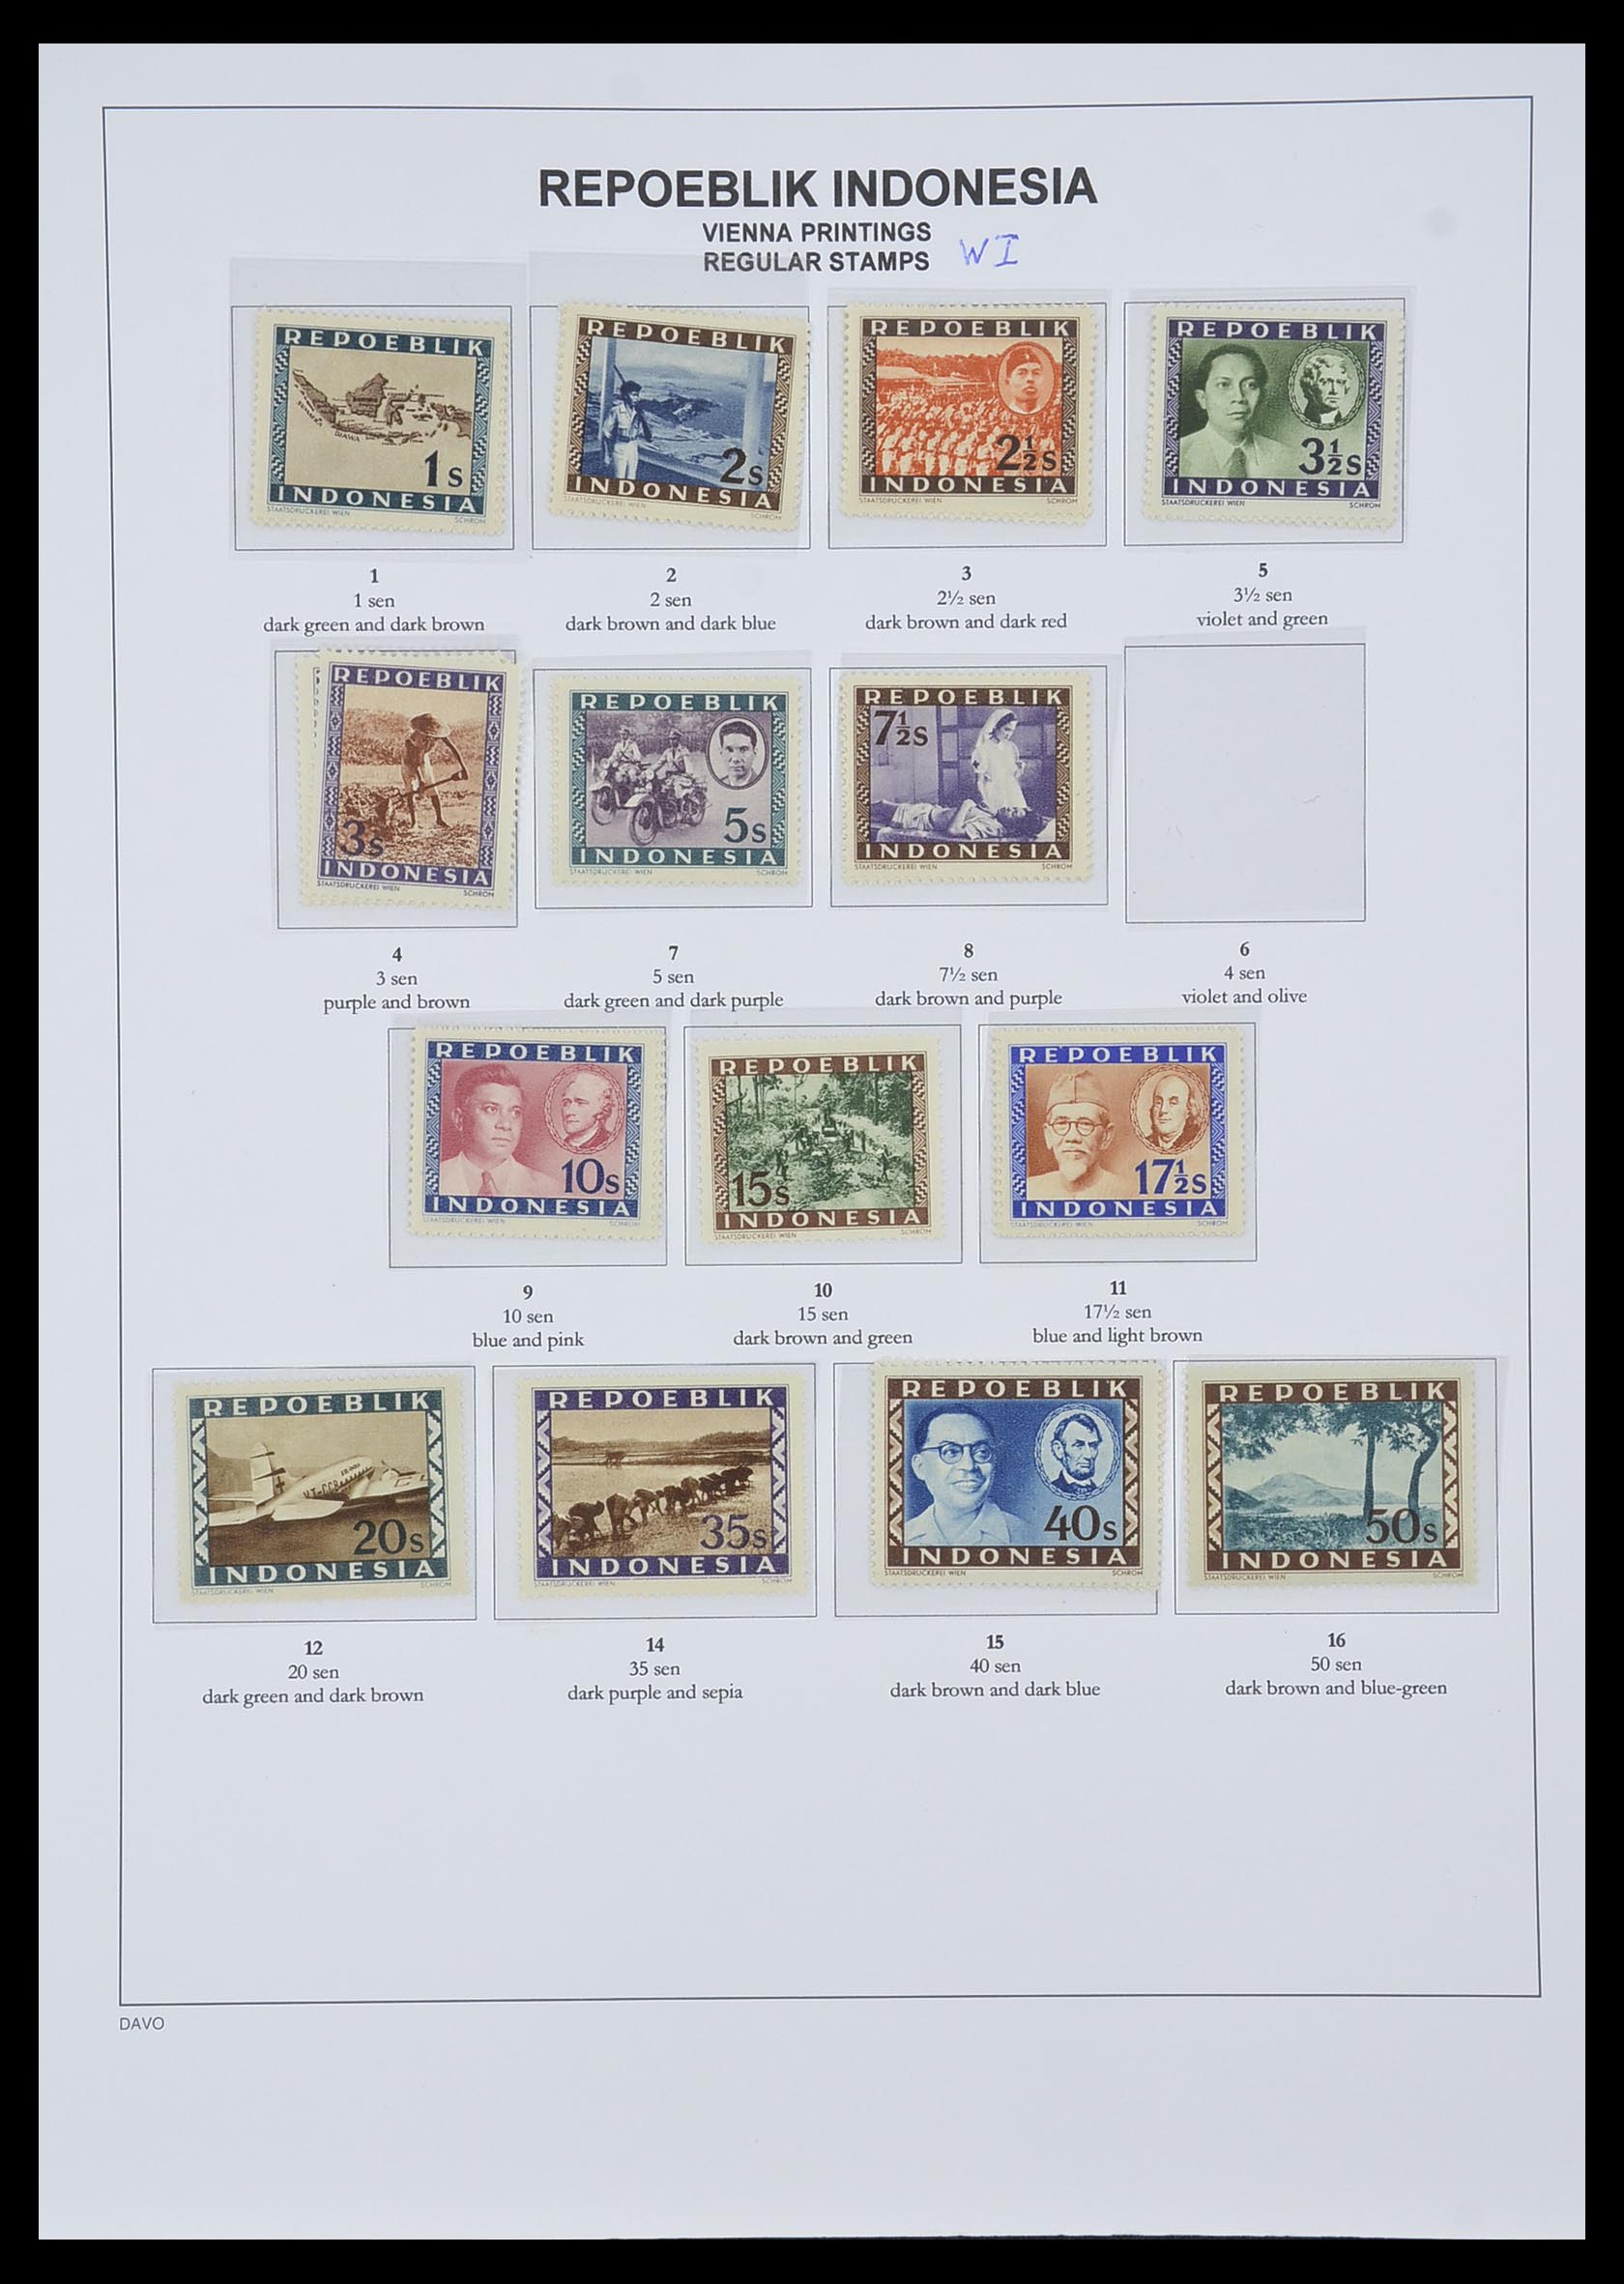 33988 009 - Stamp collection 33988 Vienna printings Indonesia.